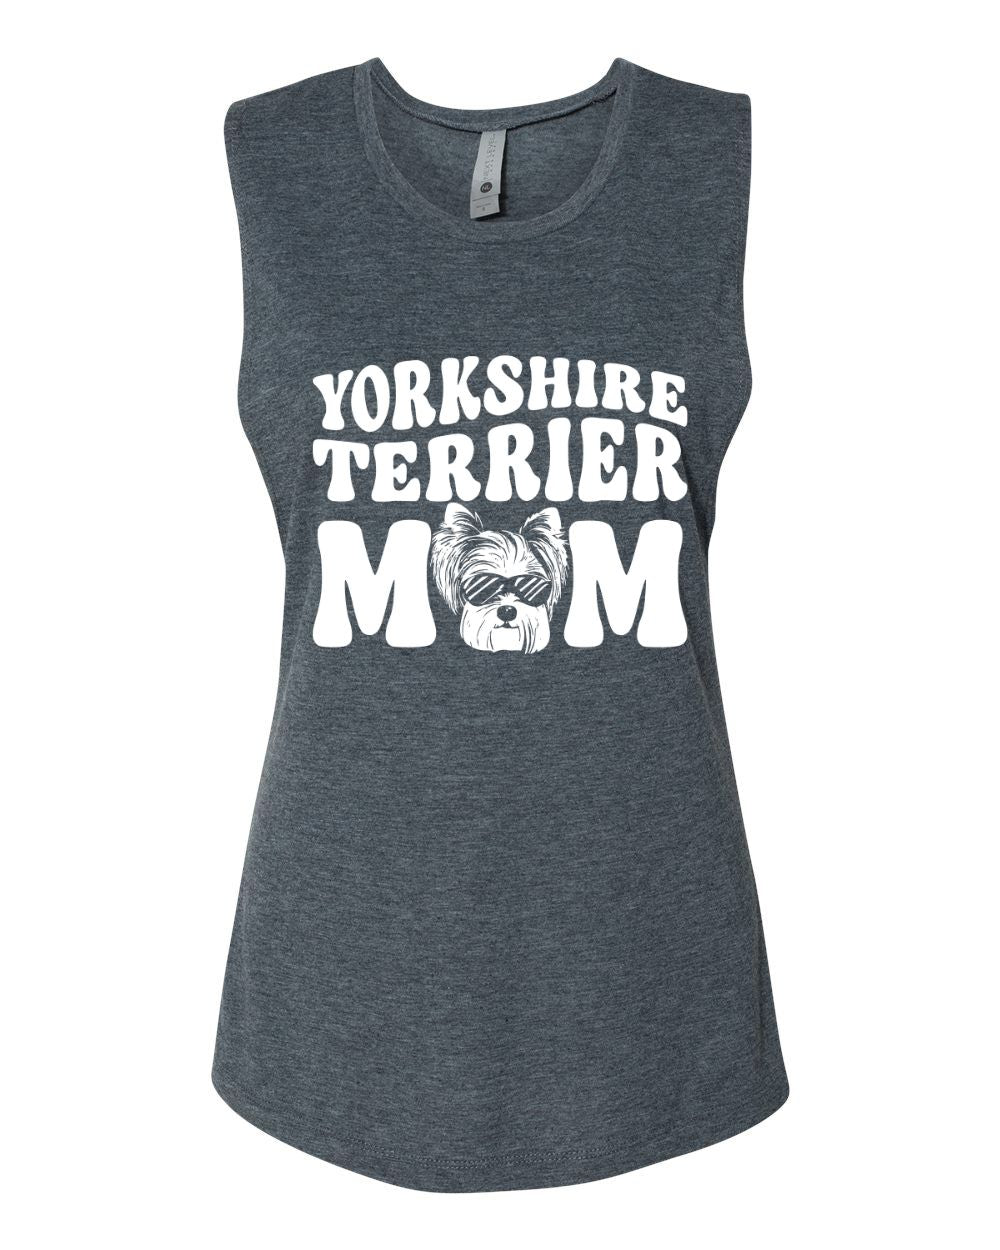 Yorkshire Terrier Mom Muscle Tank